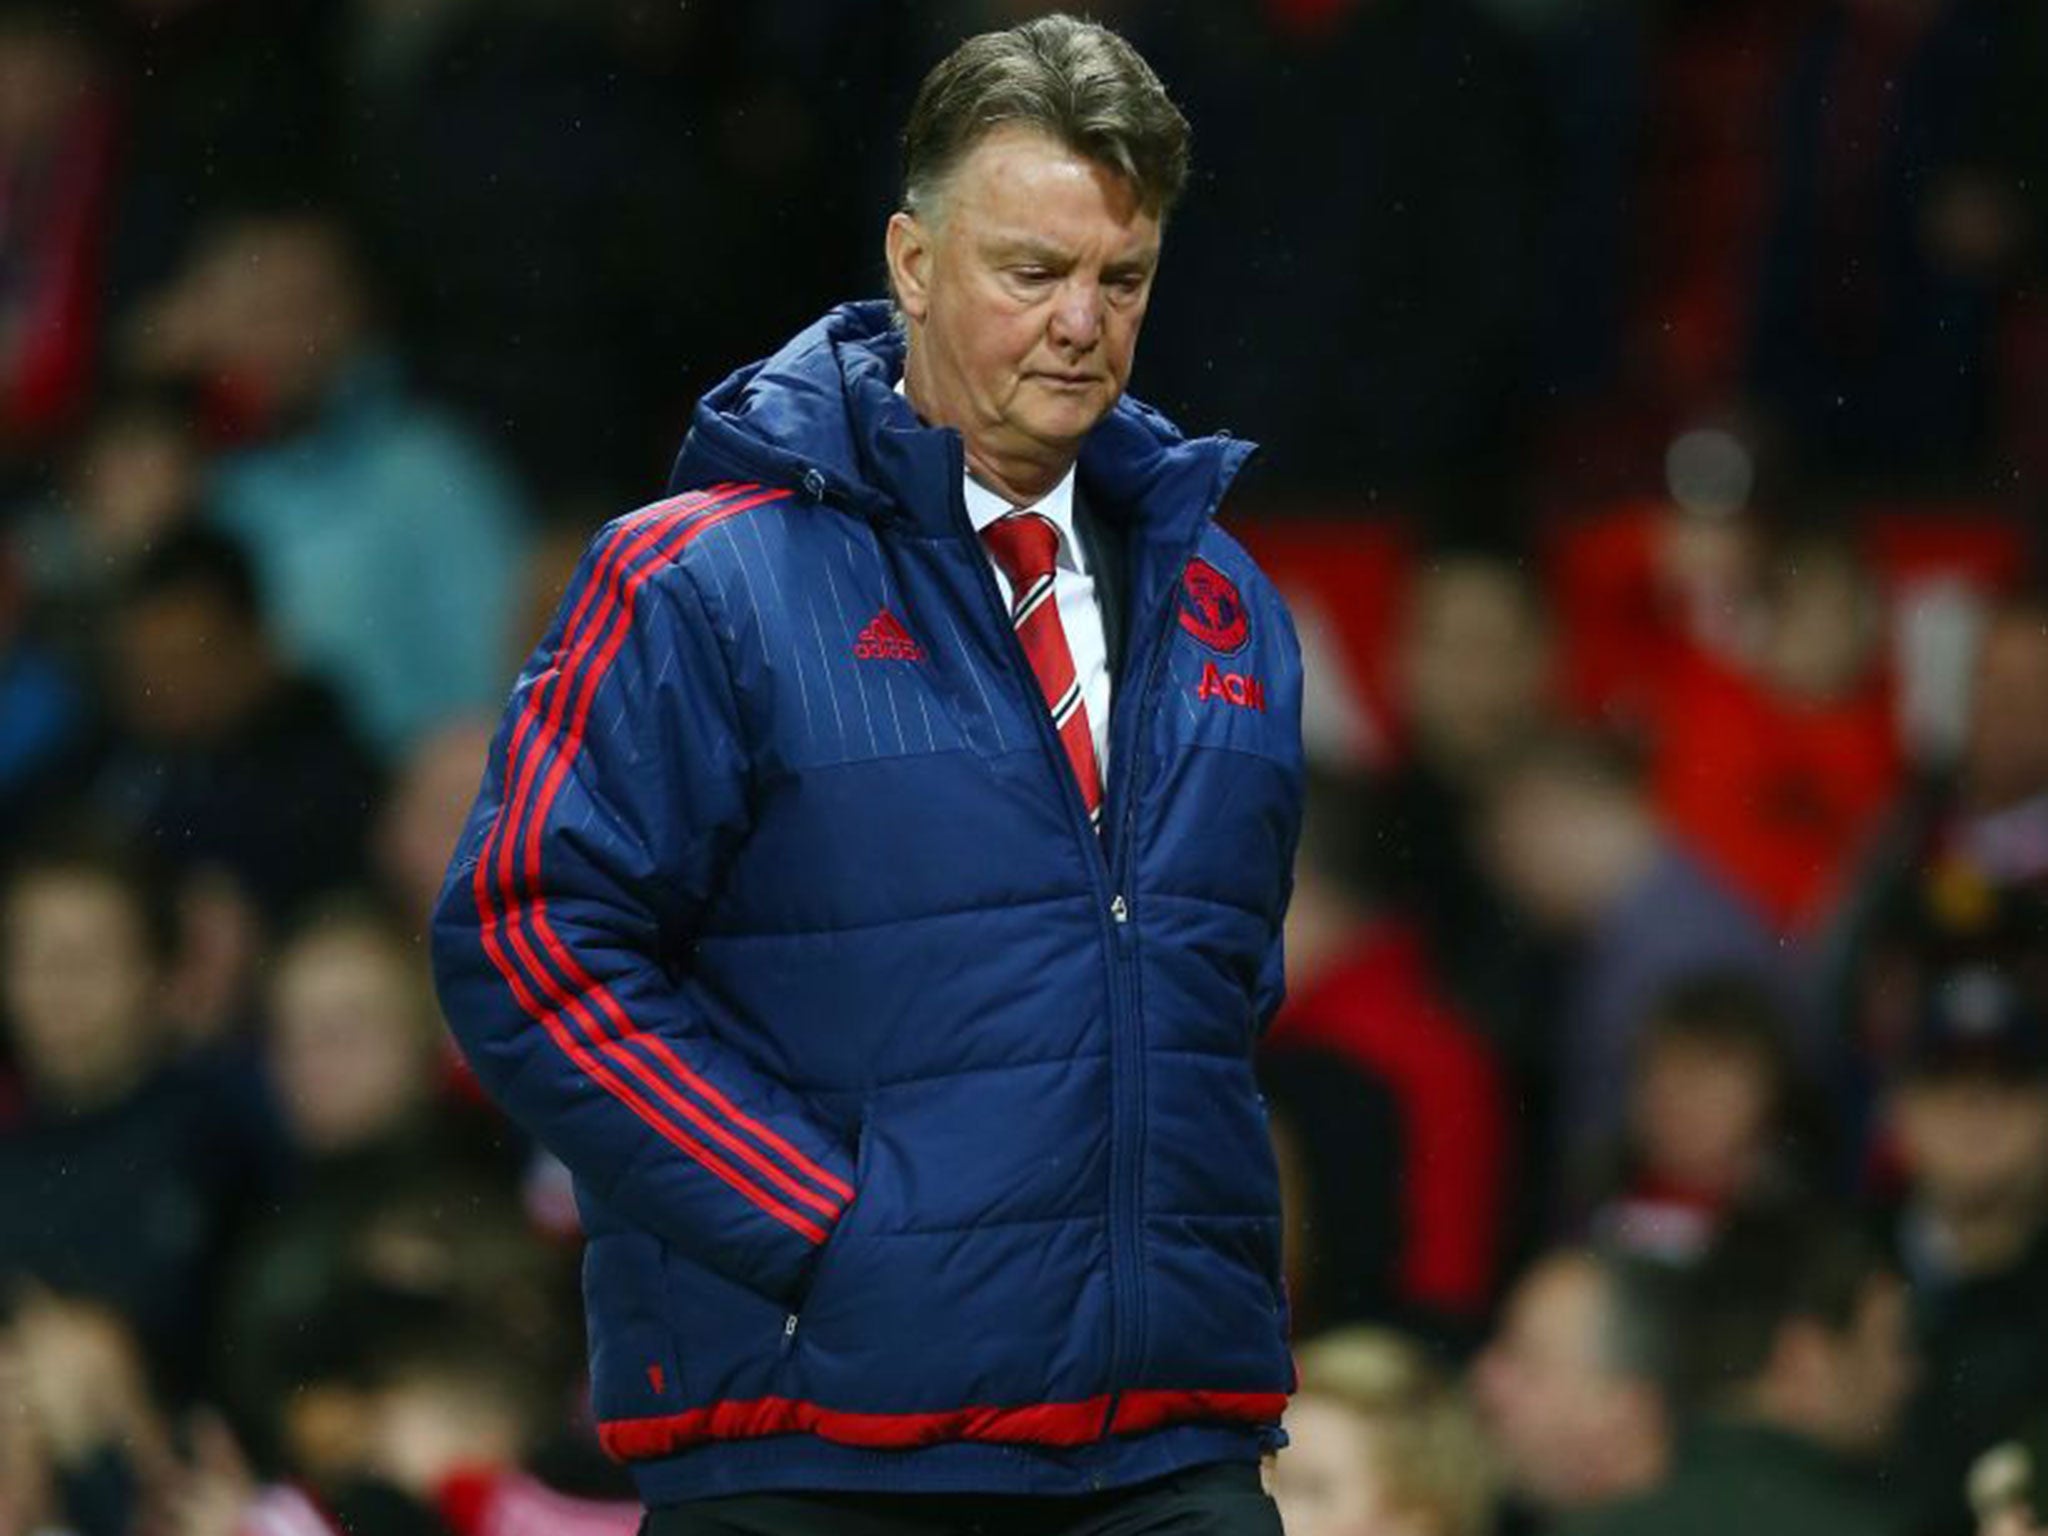 Louis van Gaal might not make it to the end of his second season in Manchester